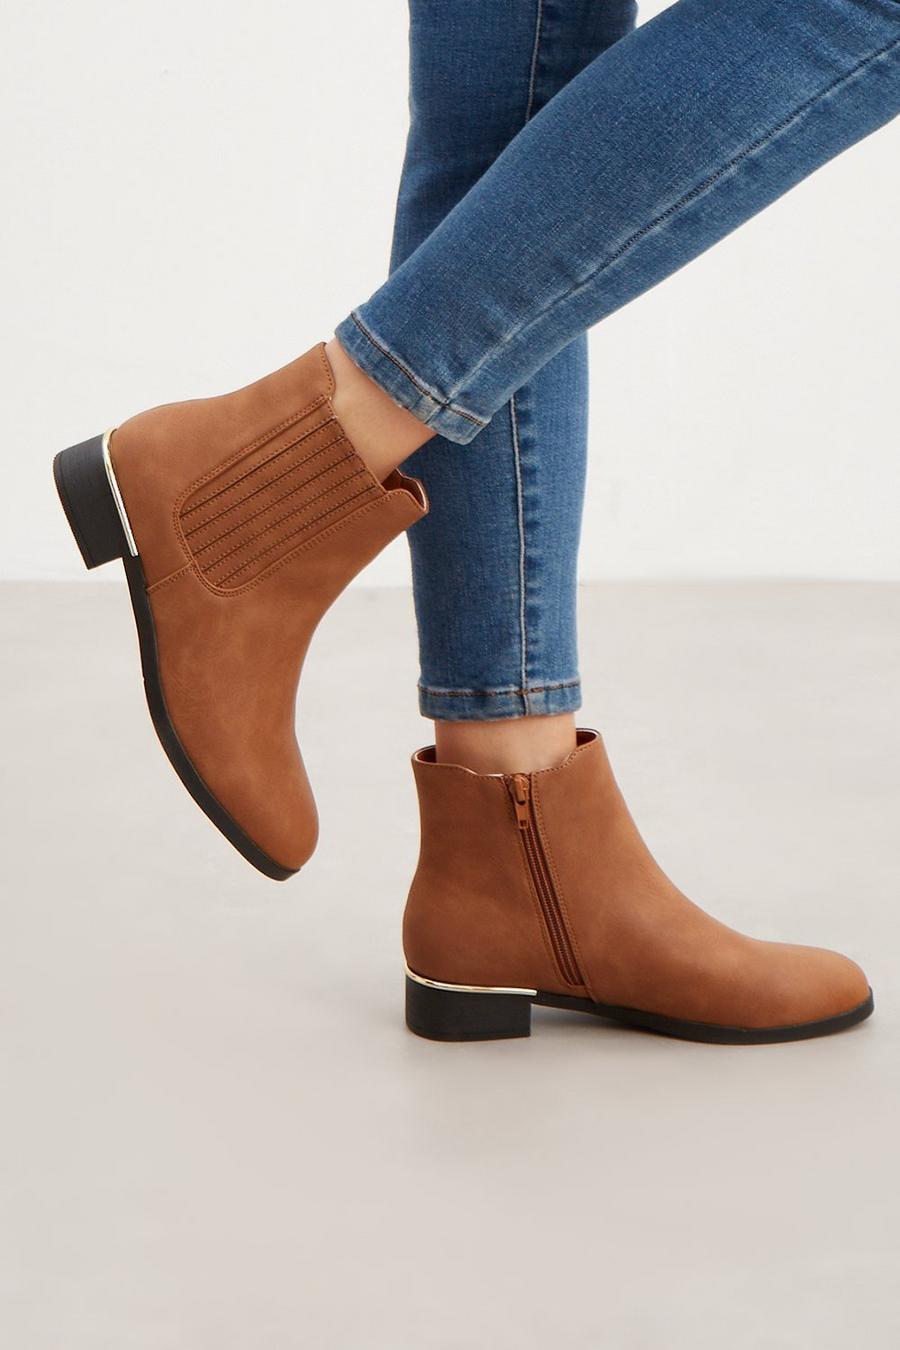 Good For The Sole: Solo Heel Trim Ankle Boot